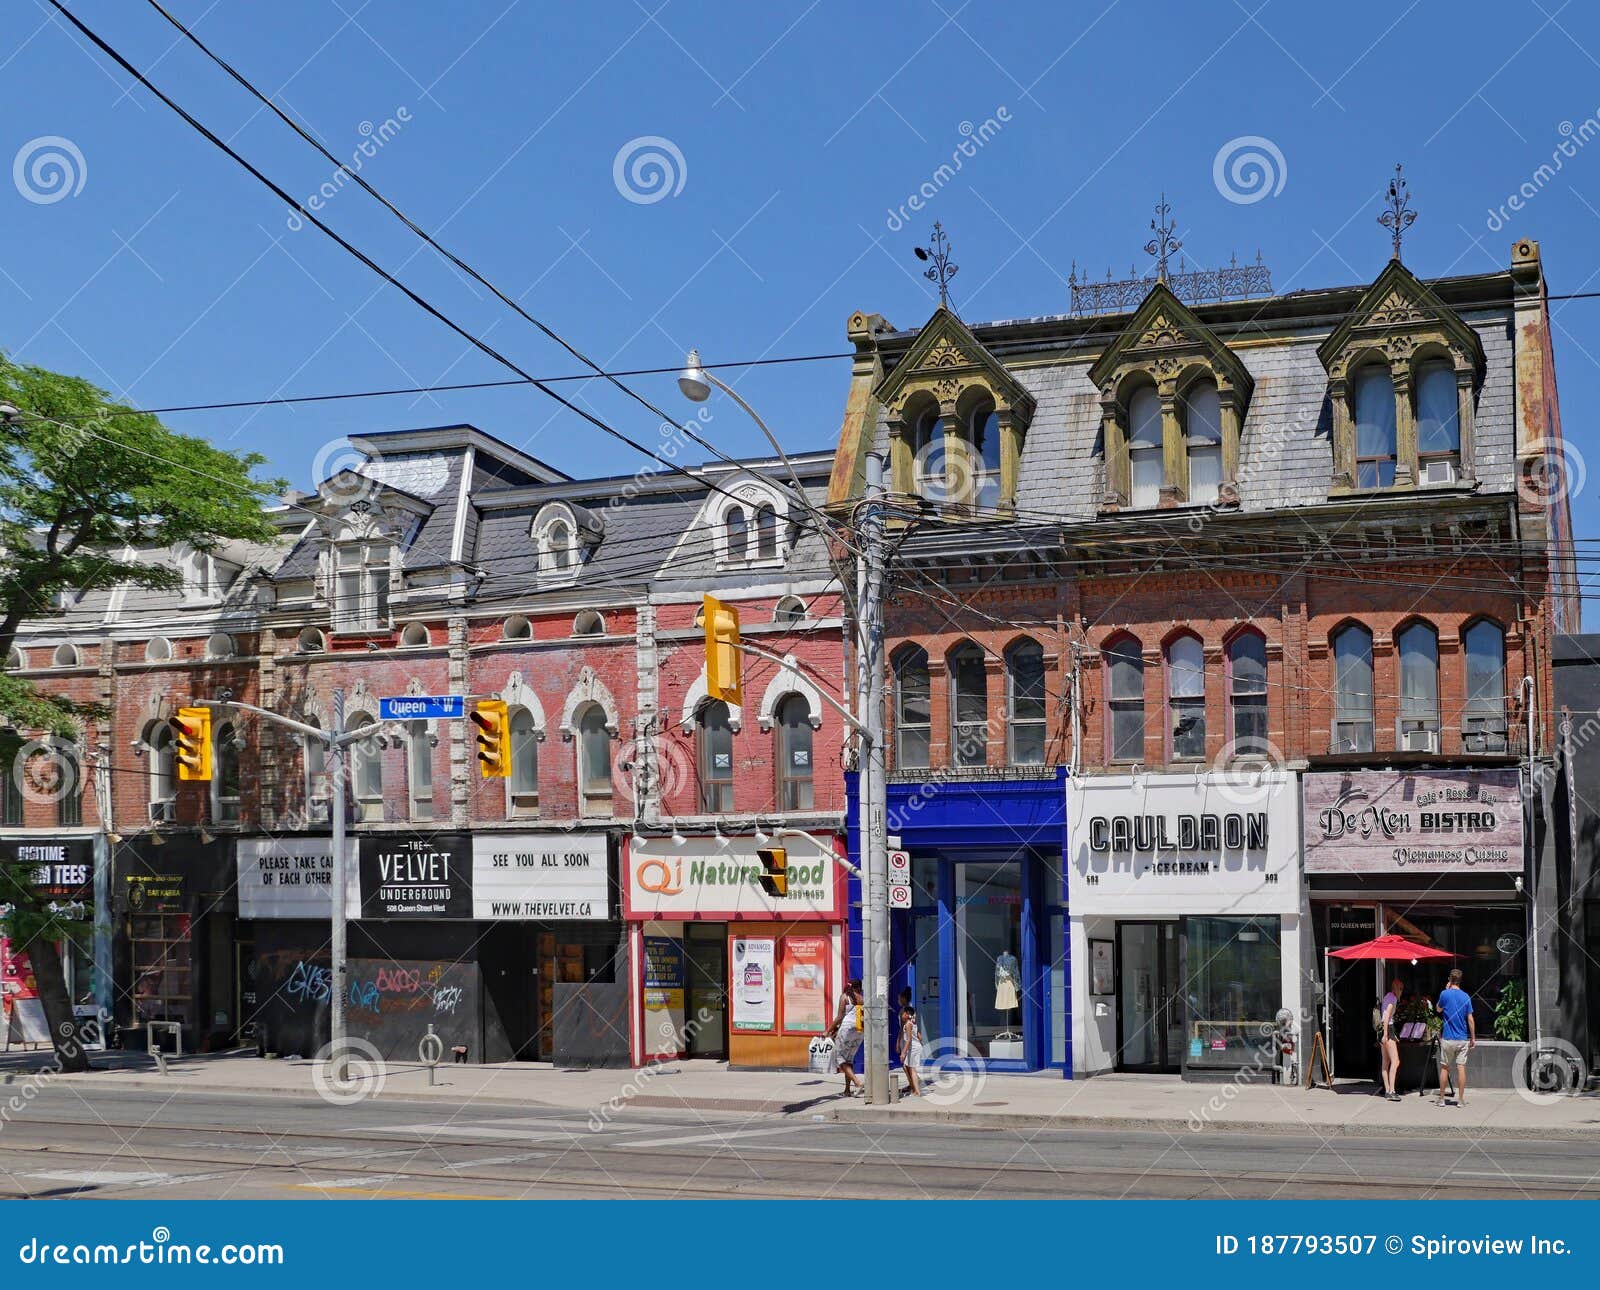 Queen Street in Downtown Toronto Preserves the Ornate Facades of